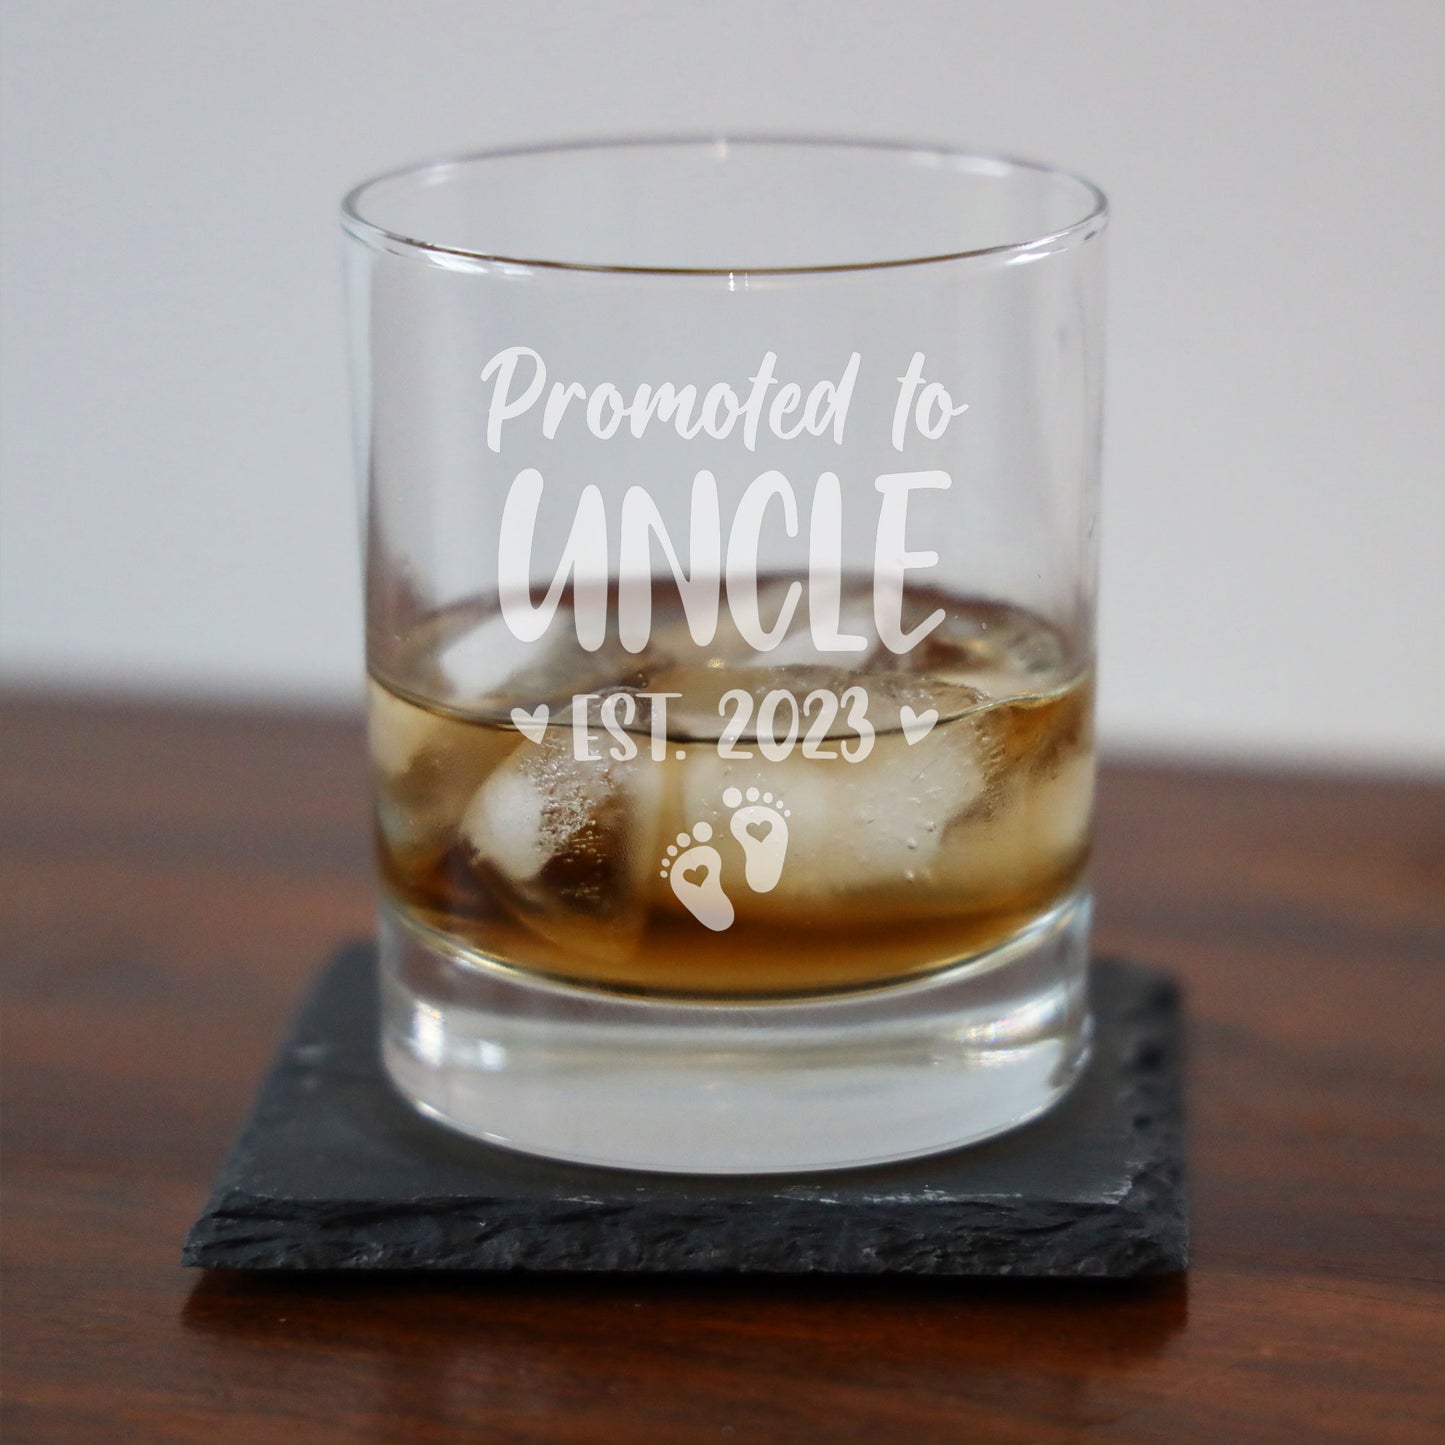 Promoted To Uncle Engraved Whisky Glass  - Always Looking Good -   